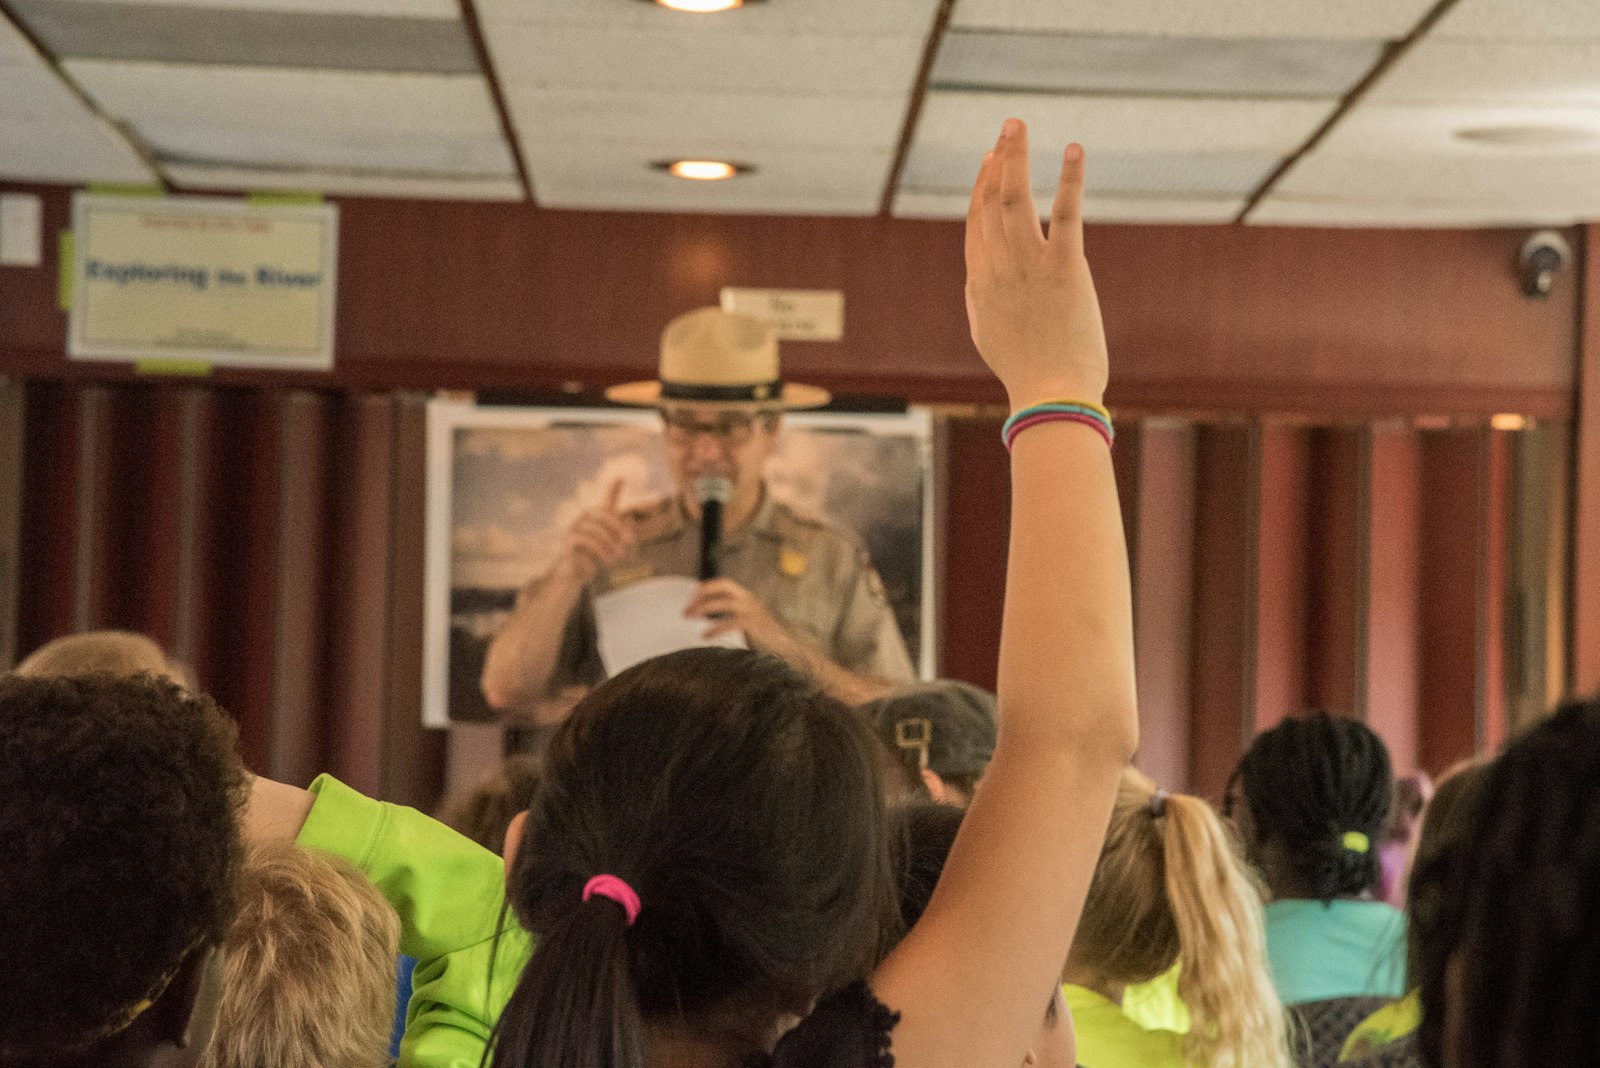 A group of students listen to a ranger speak. One raises their hand.